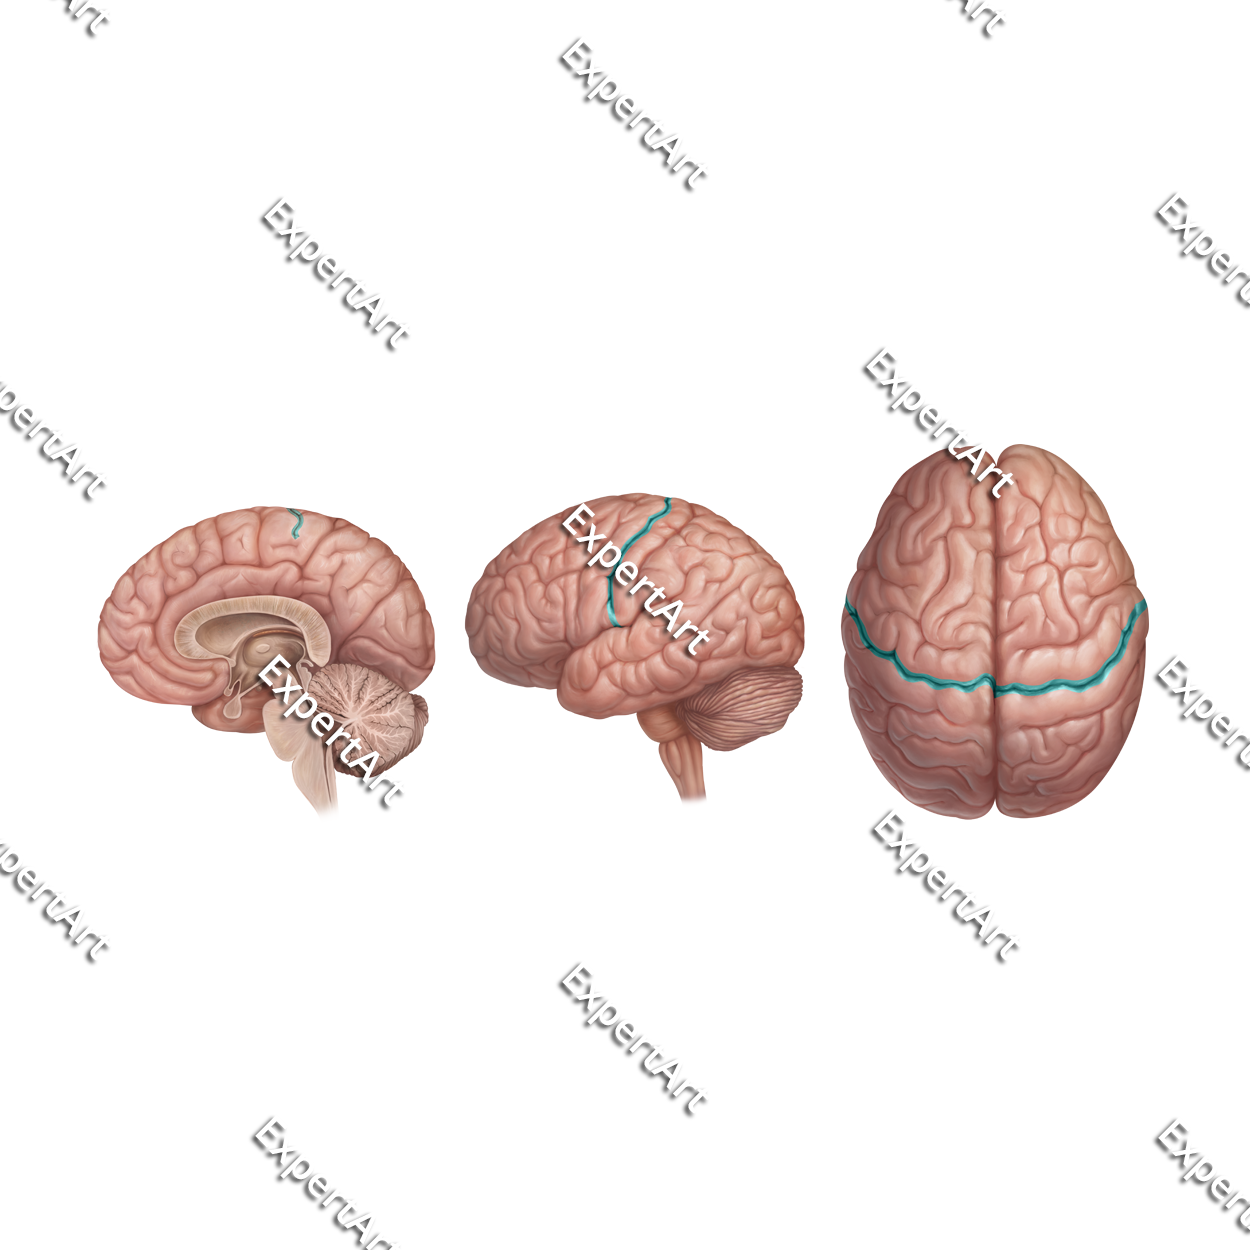 CENTRAL SULCUS